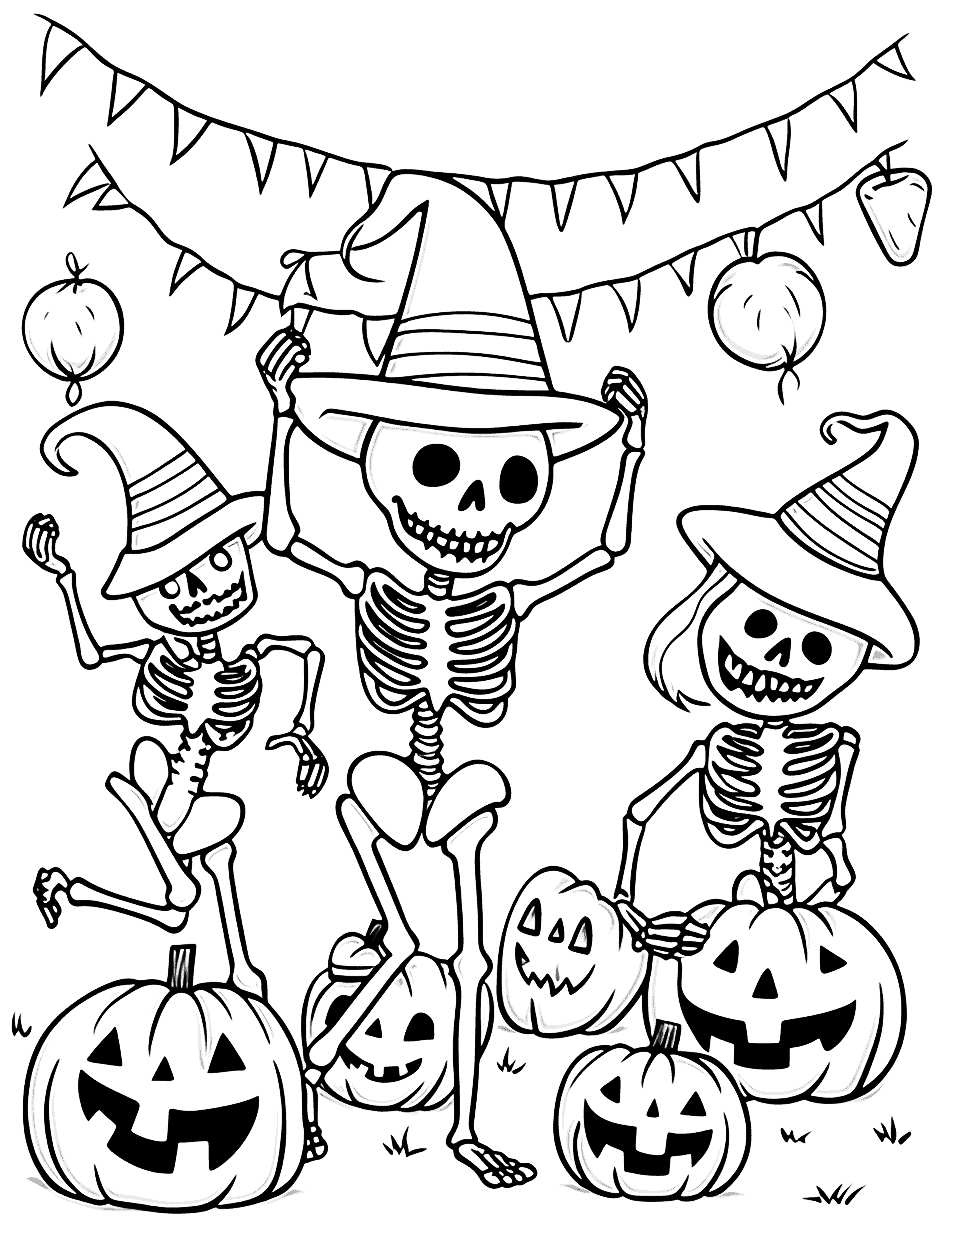 Friendly Skeleton Party Halloween Coloring Page - A bunch of friendly skeletons having a party, dancing, and playing music.